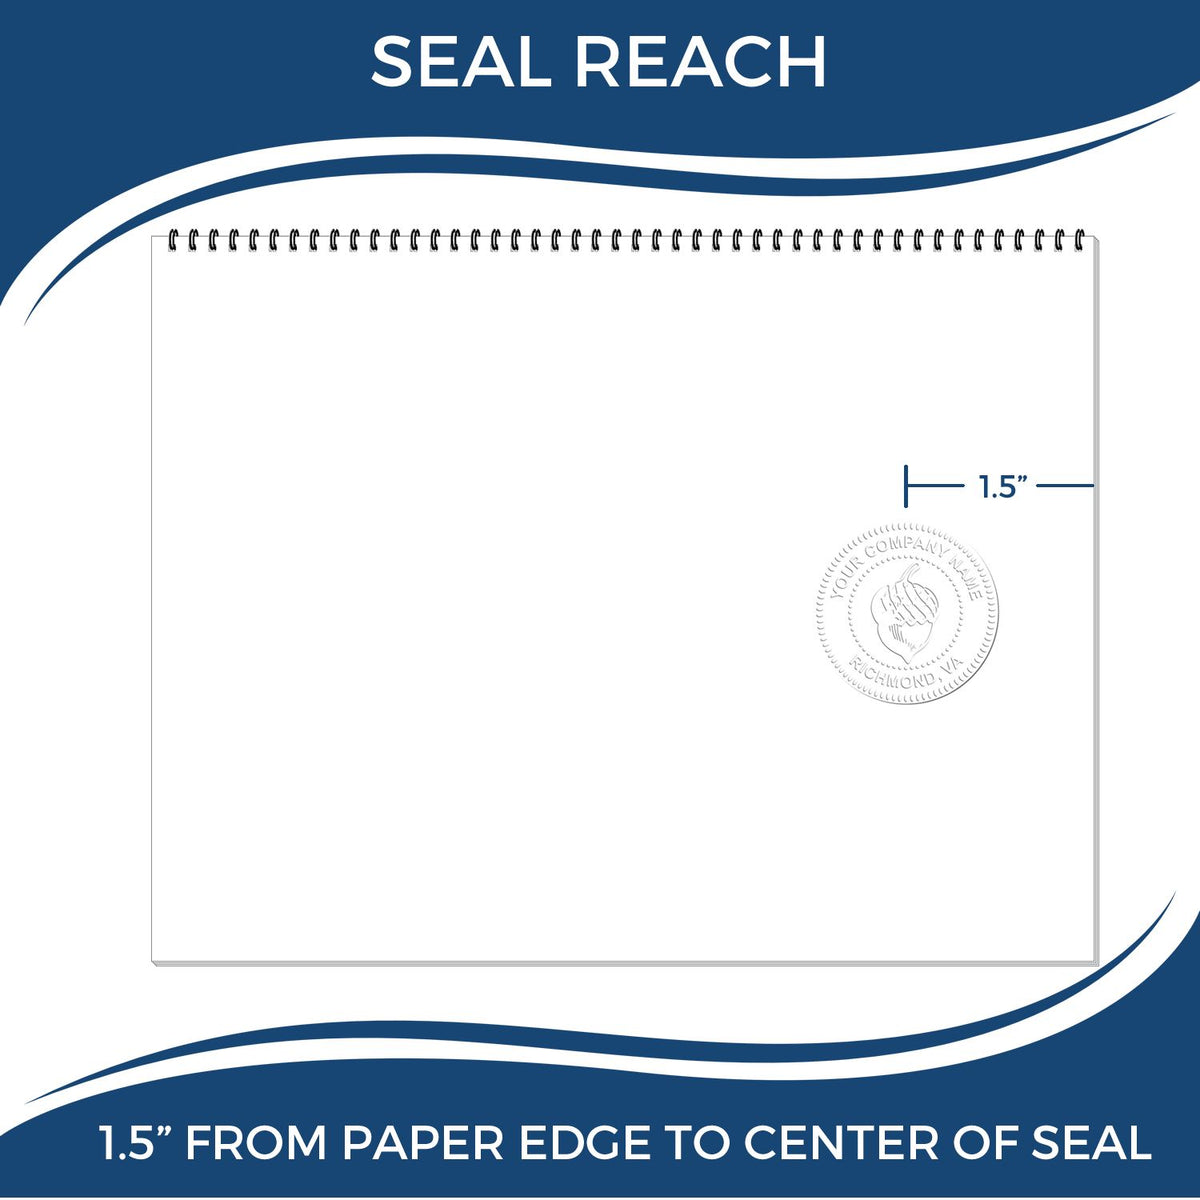 An infographic showing the seal reach which is represented by a ruler and a miniature seal image of the Handheld Missouri Professional Engineer Embosser